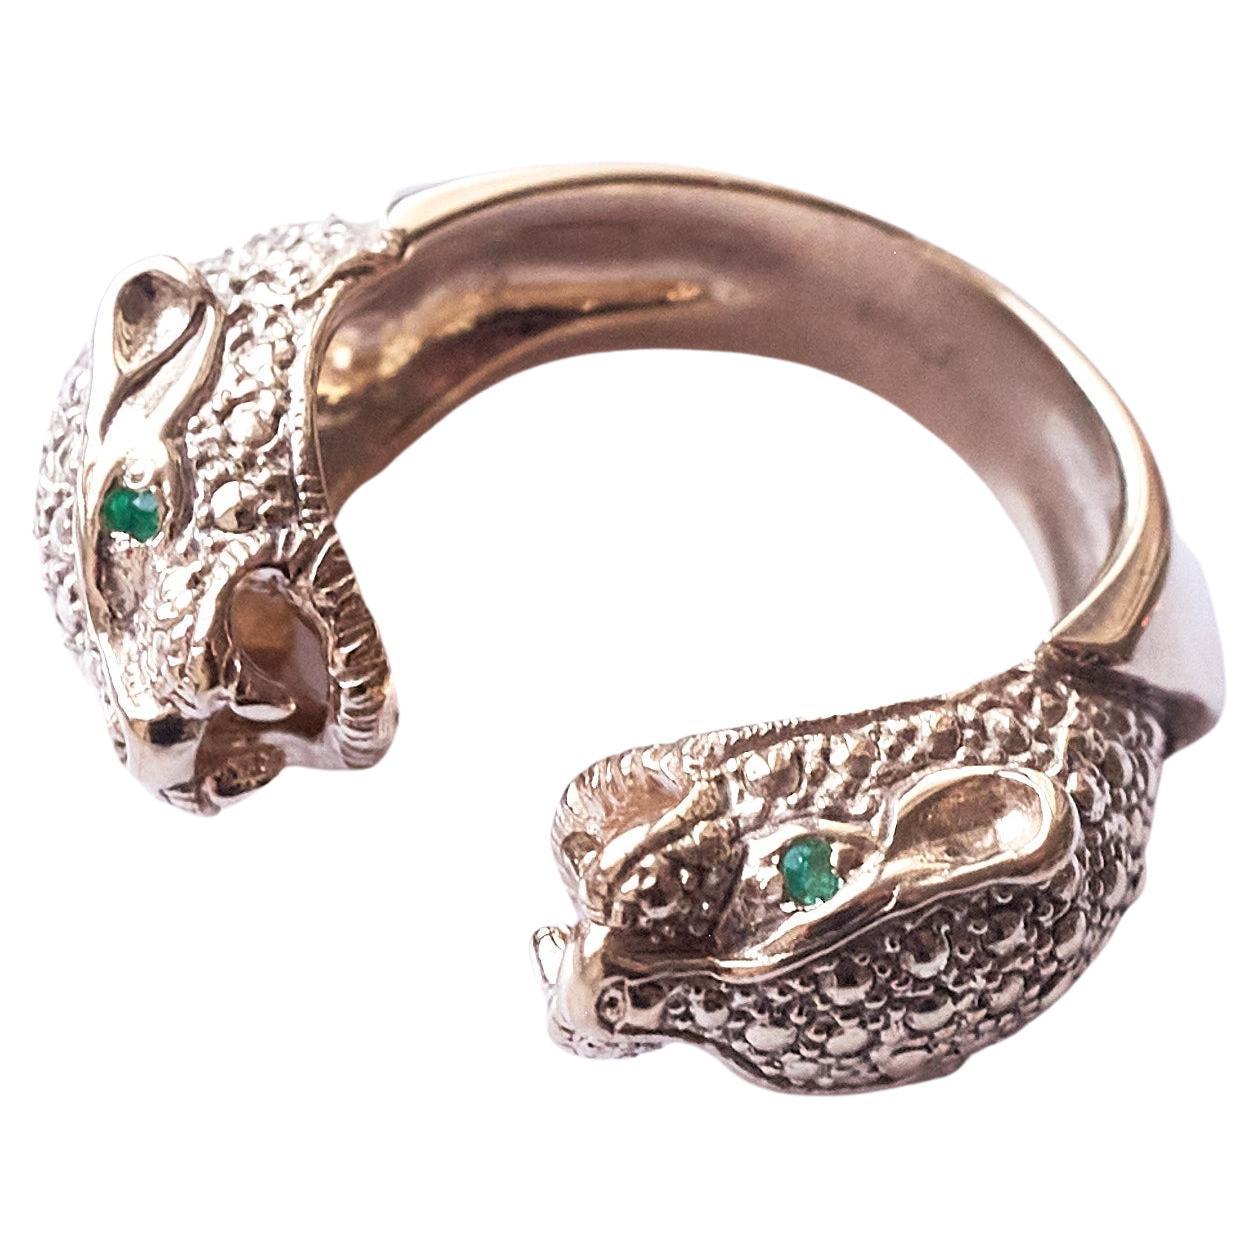 Emerald Jaguar Panther Ring Cocktail Animal Jewelry Bronze J Dauphin For Sale